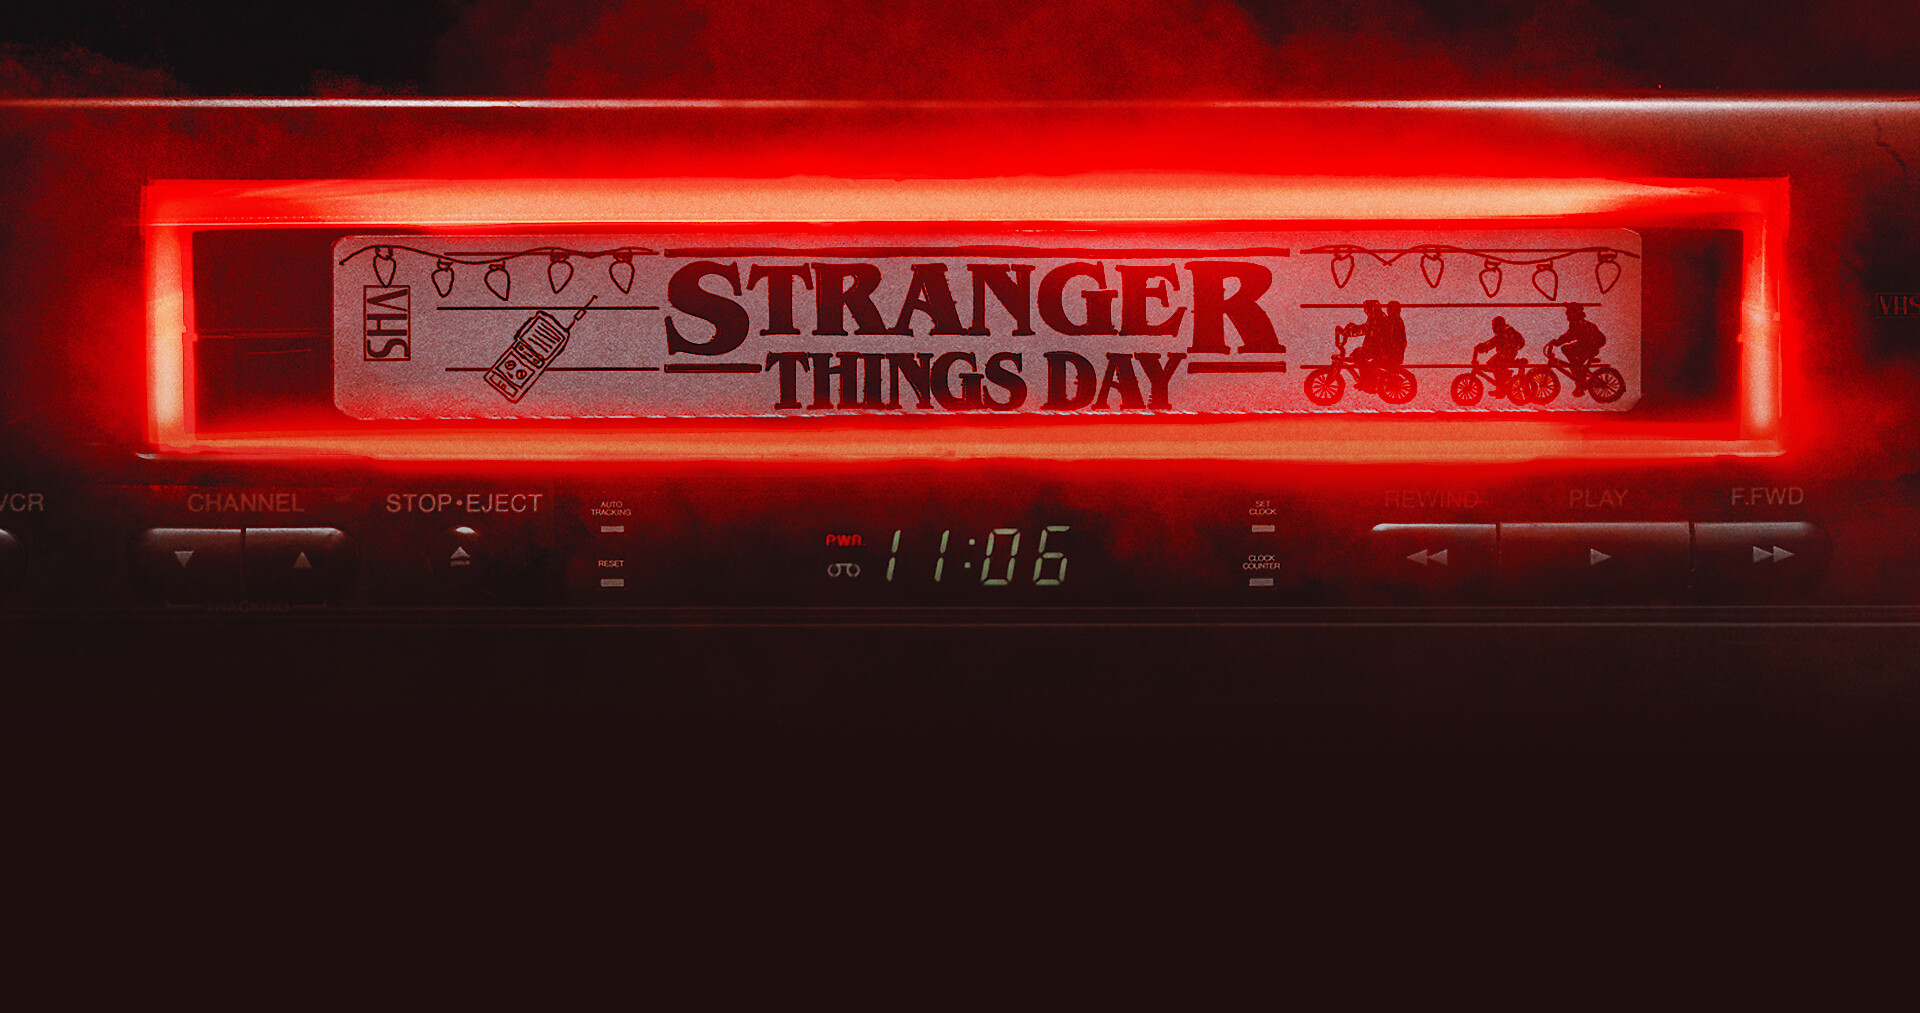 Stranger Things season 5 is not coming to Netflix in January 2023